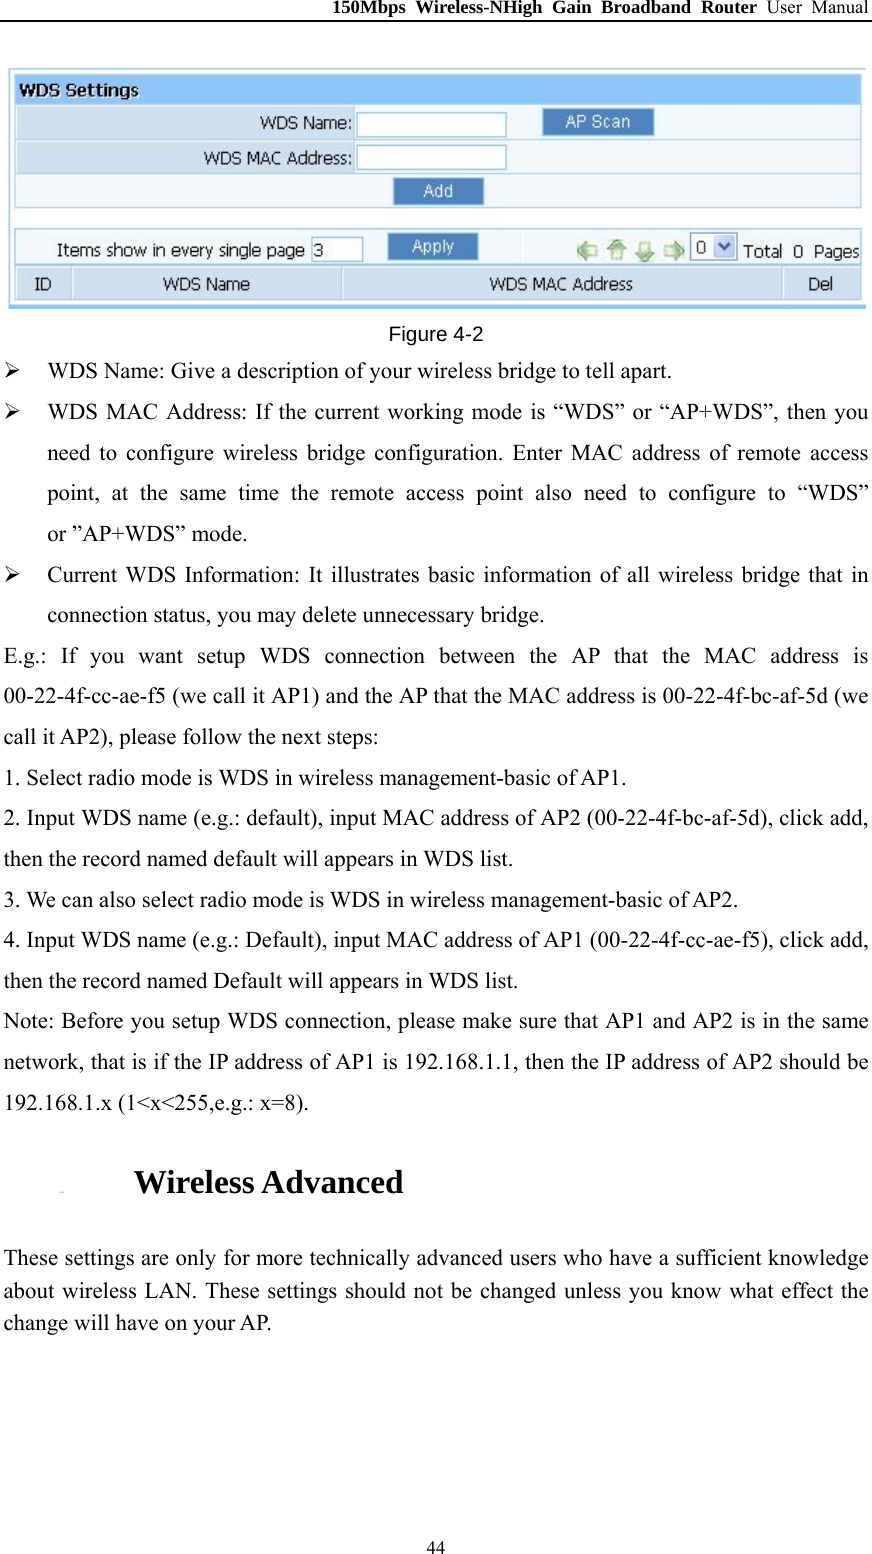 150Mbps Wireless-NHigh Gain Broadband Router User Manual  Figure 4-2  WDS Name: Give a description of your wireless bridge to tell apart.  WDS MAC Address: If the current working mode is “WDS” or “AP+WDS”, then you need to configure wireless bridge configuration. Enter MAC address of remote access point, at the same time the remote access point also need to configure to “WDS” or ”AP+WDS” mode.  Current WDS Information: It illustrates basic information of all wireless bridge that in connection status, you may delete unnecessary bridge. E.g.: If you want setup WDS connection between the AP that the MAC address is 00-22-4f-cc-ae-f5 (we call it AP1) and the AP that the MAC address is 00-22-4f-bc-af-5d (we call it AP2), please follow the next steps: 1. Select radio mode is WDS in wireless management-basic of AP1. 2. Input WDS name (e.g.: default), input MAC address of AP2 (00-22-4f-bc-af-5d), click add, then the record named default will appears in WDS list. 3. We can also select radio mode is WDS in wireless management-basic of AP2. 4. Input WDS name (e.g.: Default), input MAC address of AP1 (00-22-4f-cc-ae-f5), click add, then the record named Default will appears in WDS list. Note: Before you setup WDS connection, please make sure that AP1 and AP2 is in the same network, that is if the IP address of AP1 is 192.168.1.1, then the IP address of AP2 should be 192.168.1.x (1&lt;x&lt;255,e.g.: x=8). 4.5.5. Wireless Advanced These settings are only for more technically advanced users who have a sufficient knowledge about wireless LAN. These settings should not be changed unless you know what effect the change will have on your AP.  44